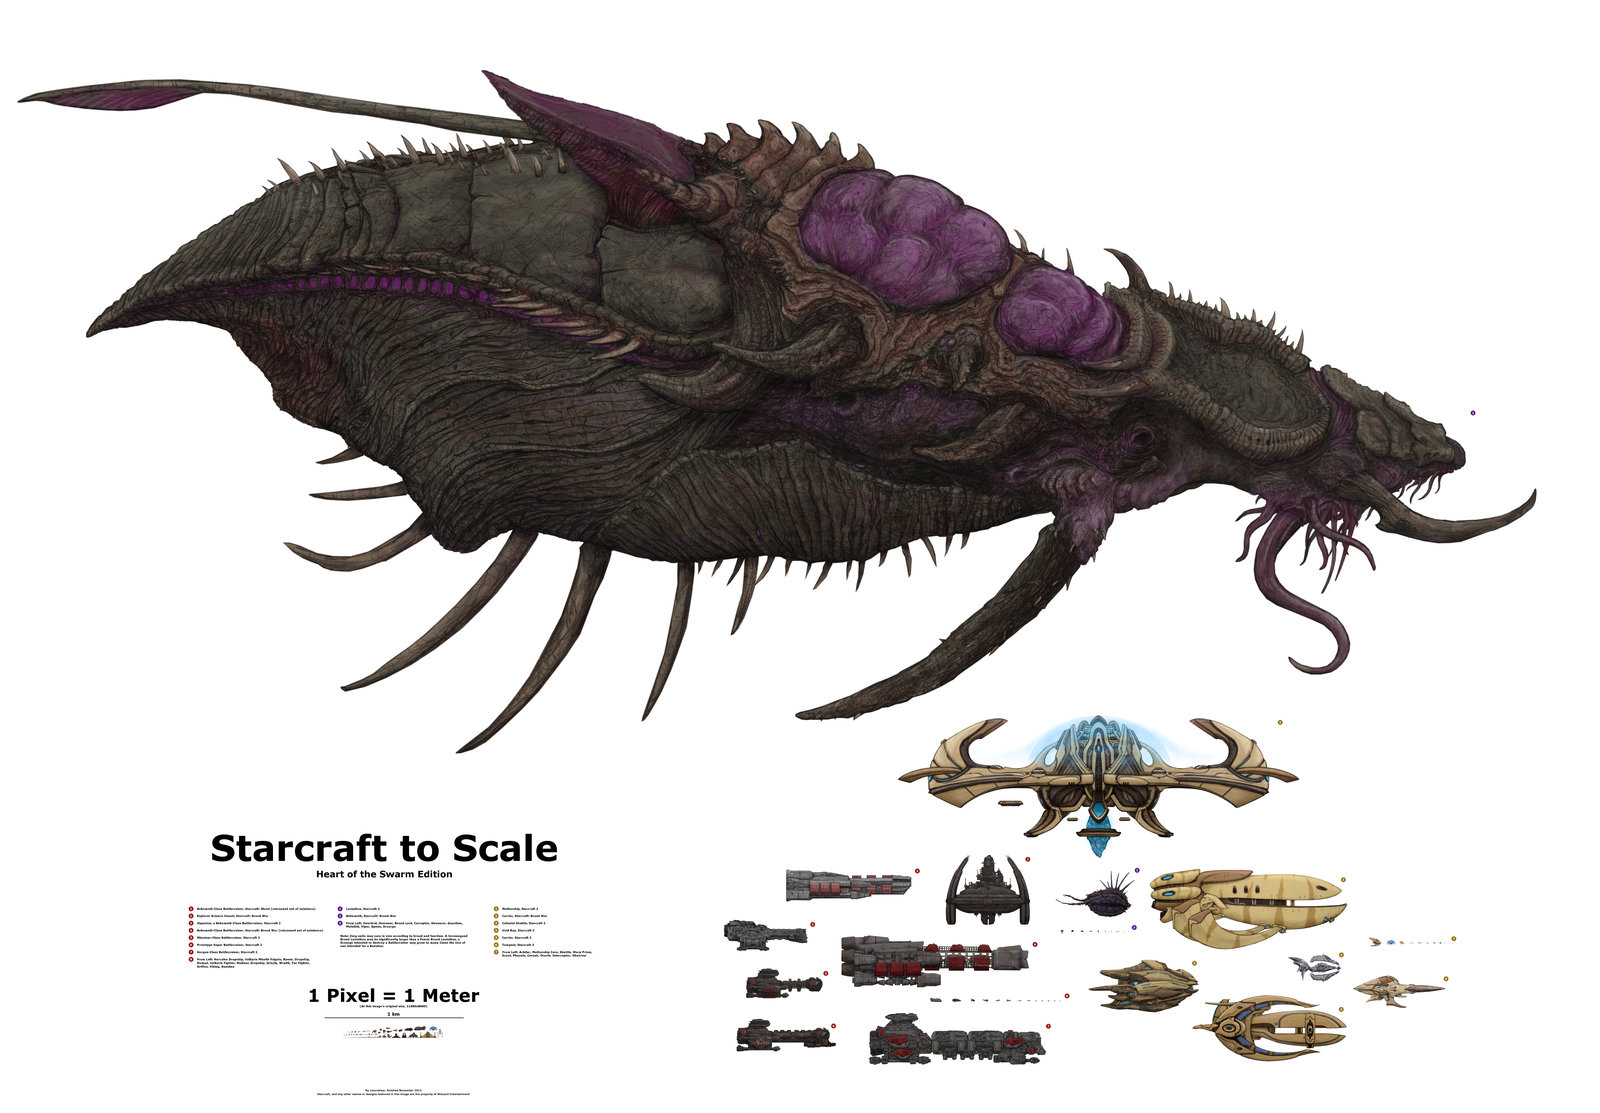 biggest bases and spaceships in video games - starcraft Leviathans